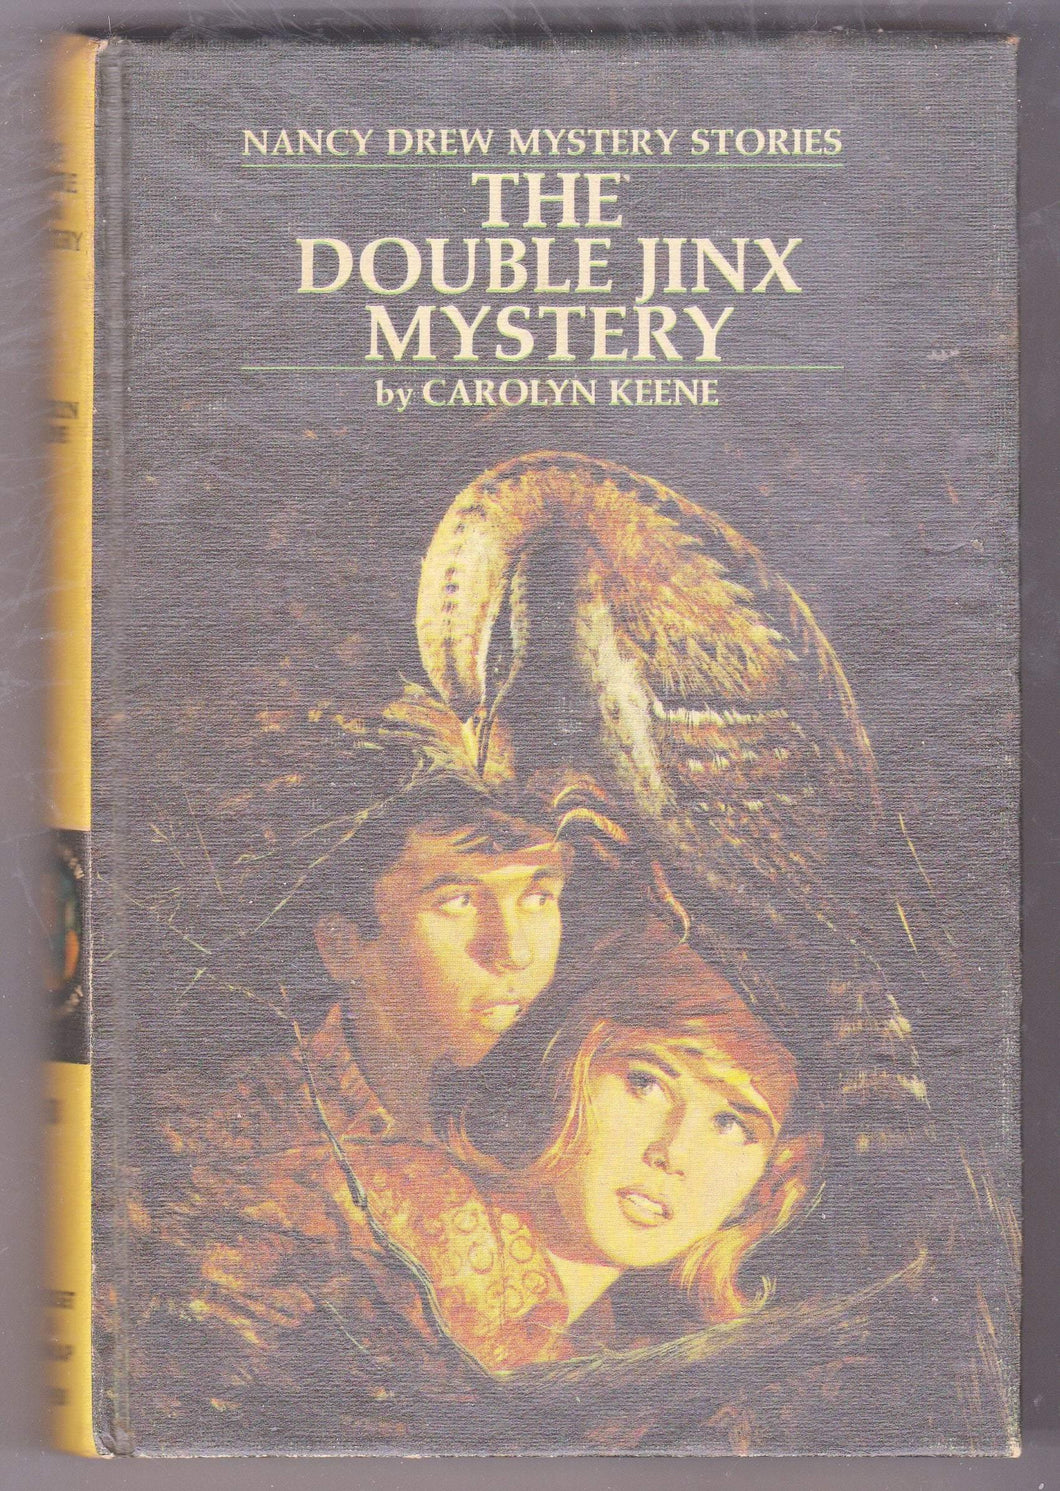 Nancy Drew Mystery Stories 50 The Double Jinx Mystery Carolyn Keen 1973 Edition Grosset and Dunlap - TulipStuff